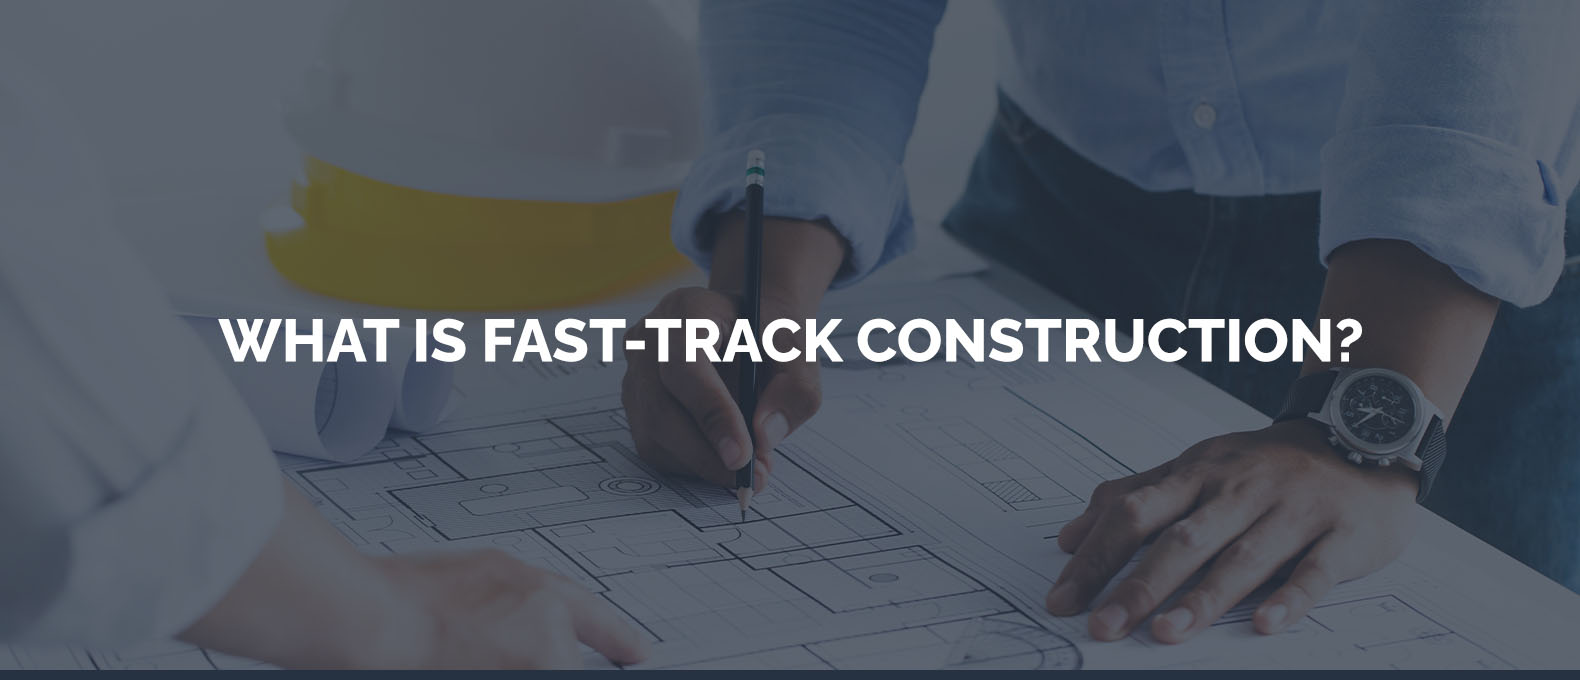 What is Fast-Track Construction?